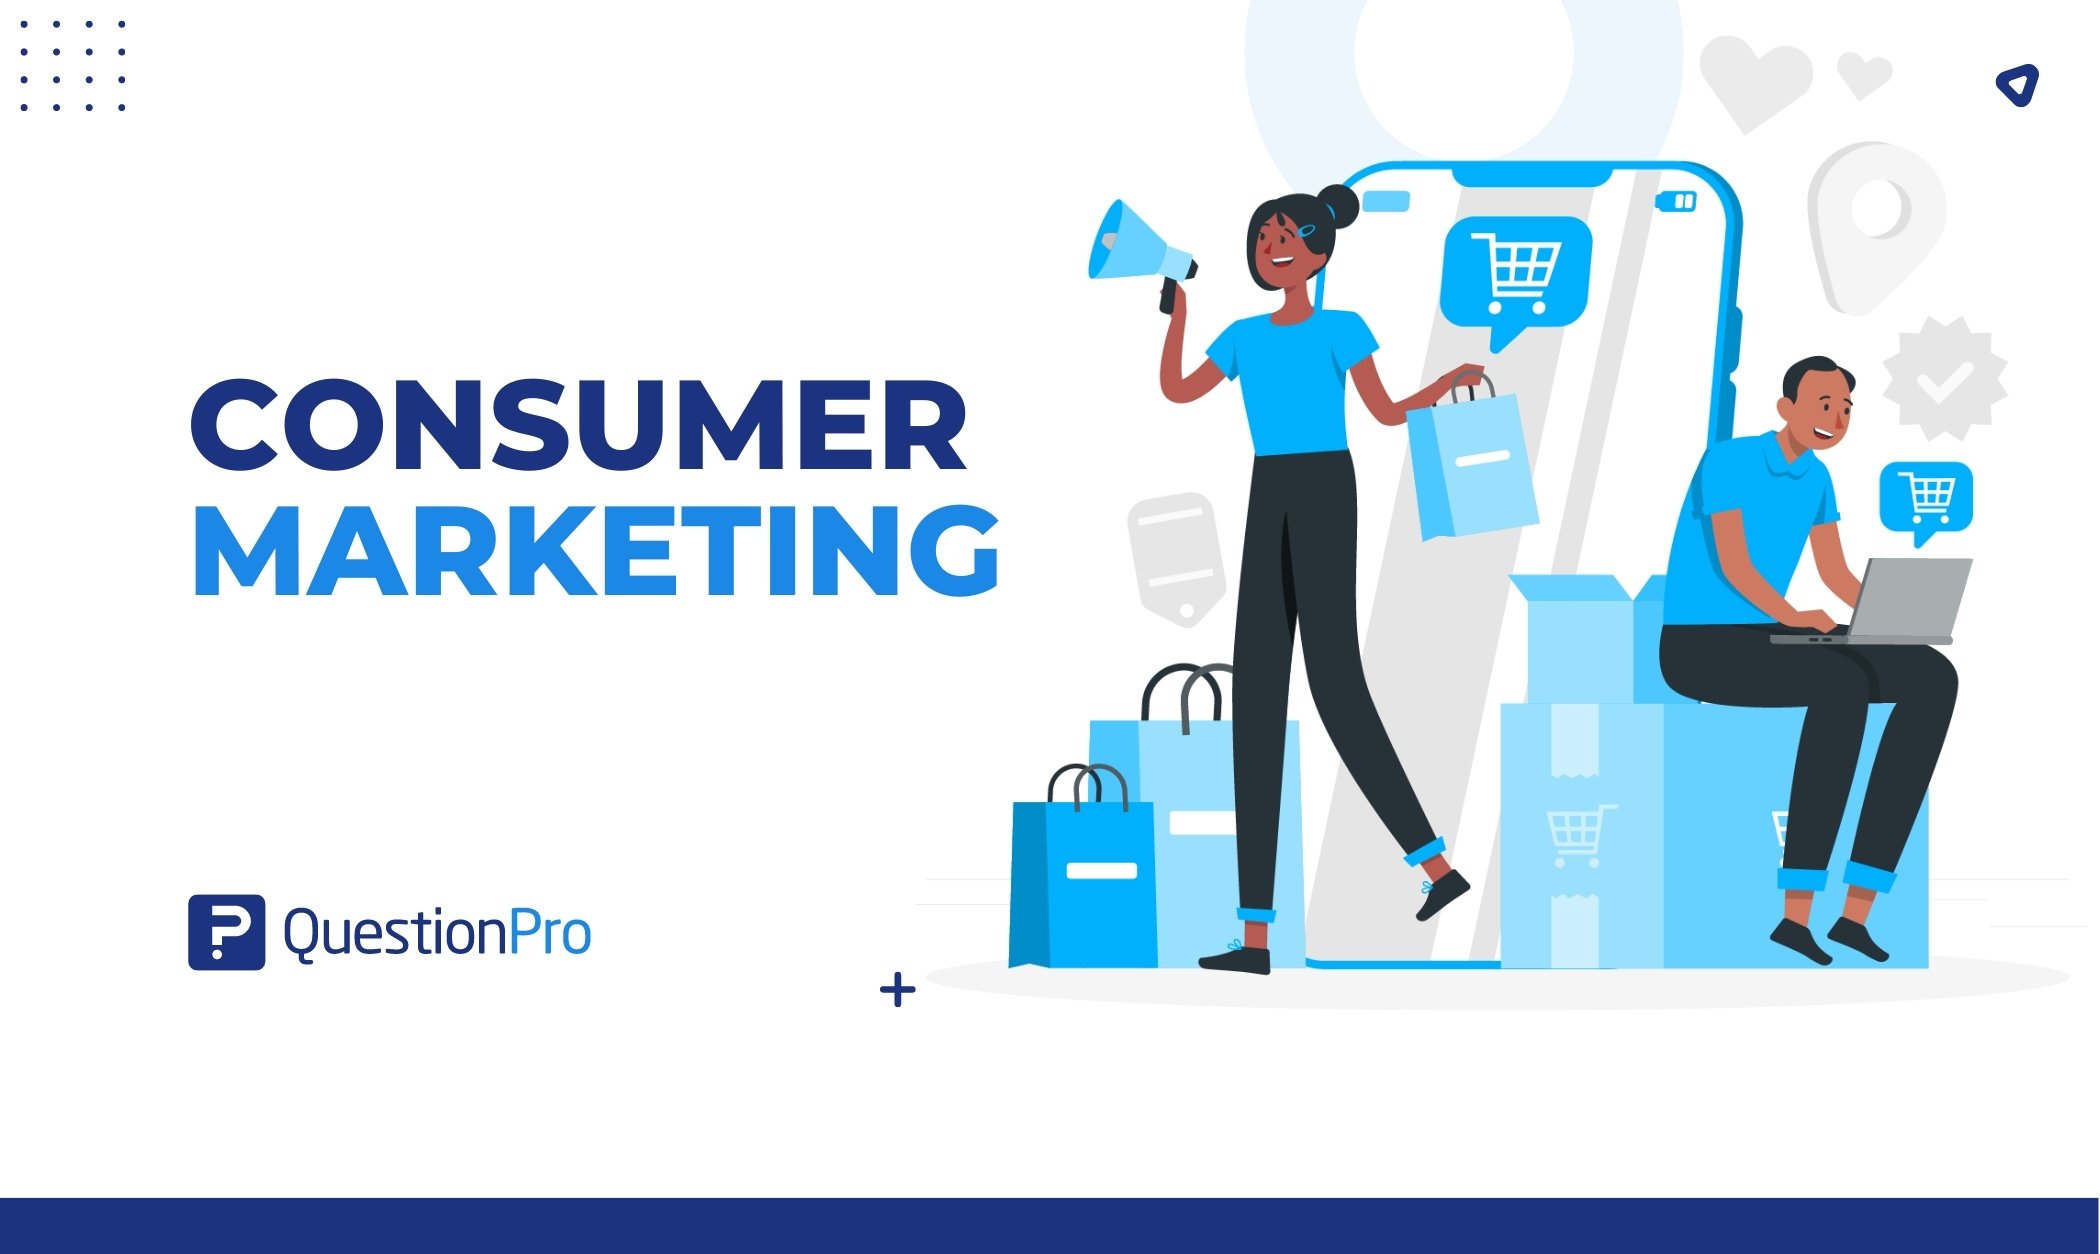 Consumer marketing explains customer behavior. It develops successful marketing strategies and boosts sales. Learn everything about it.